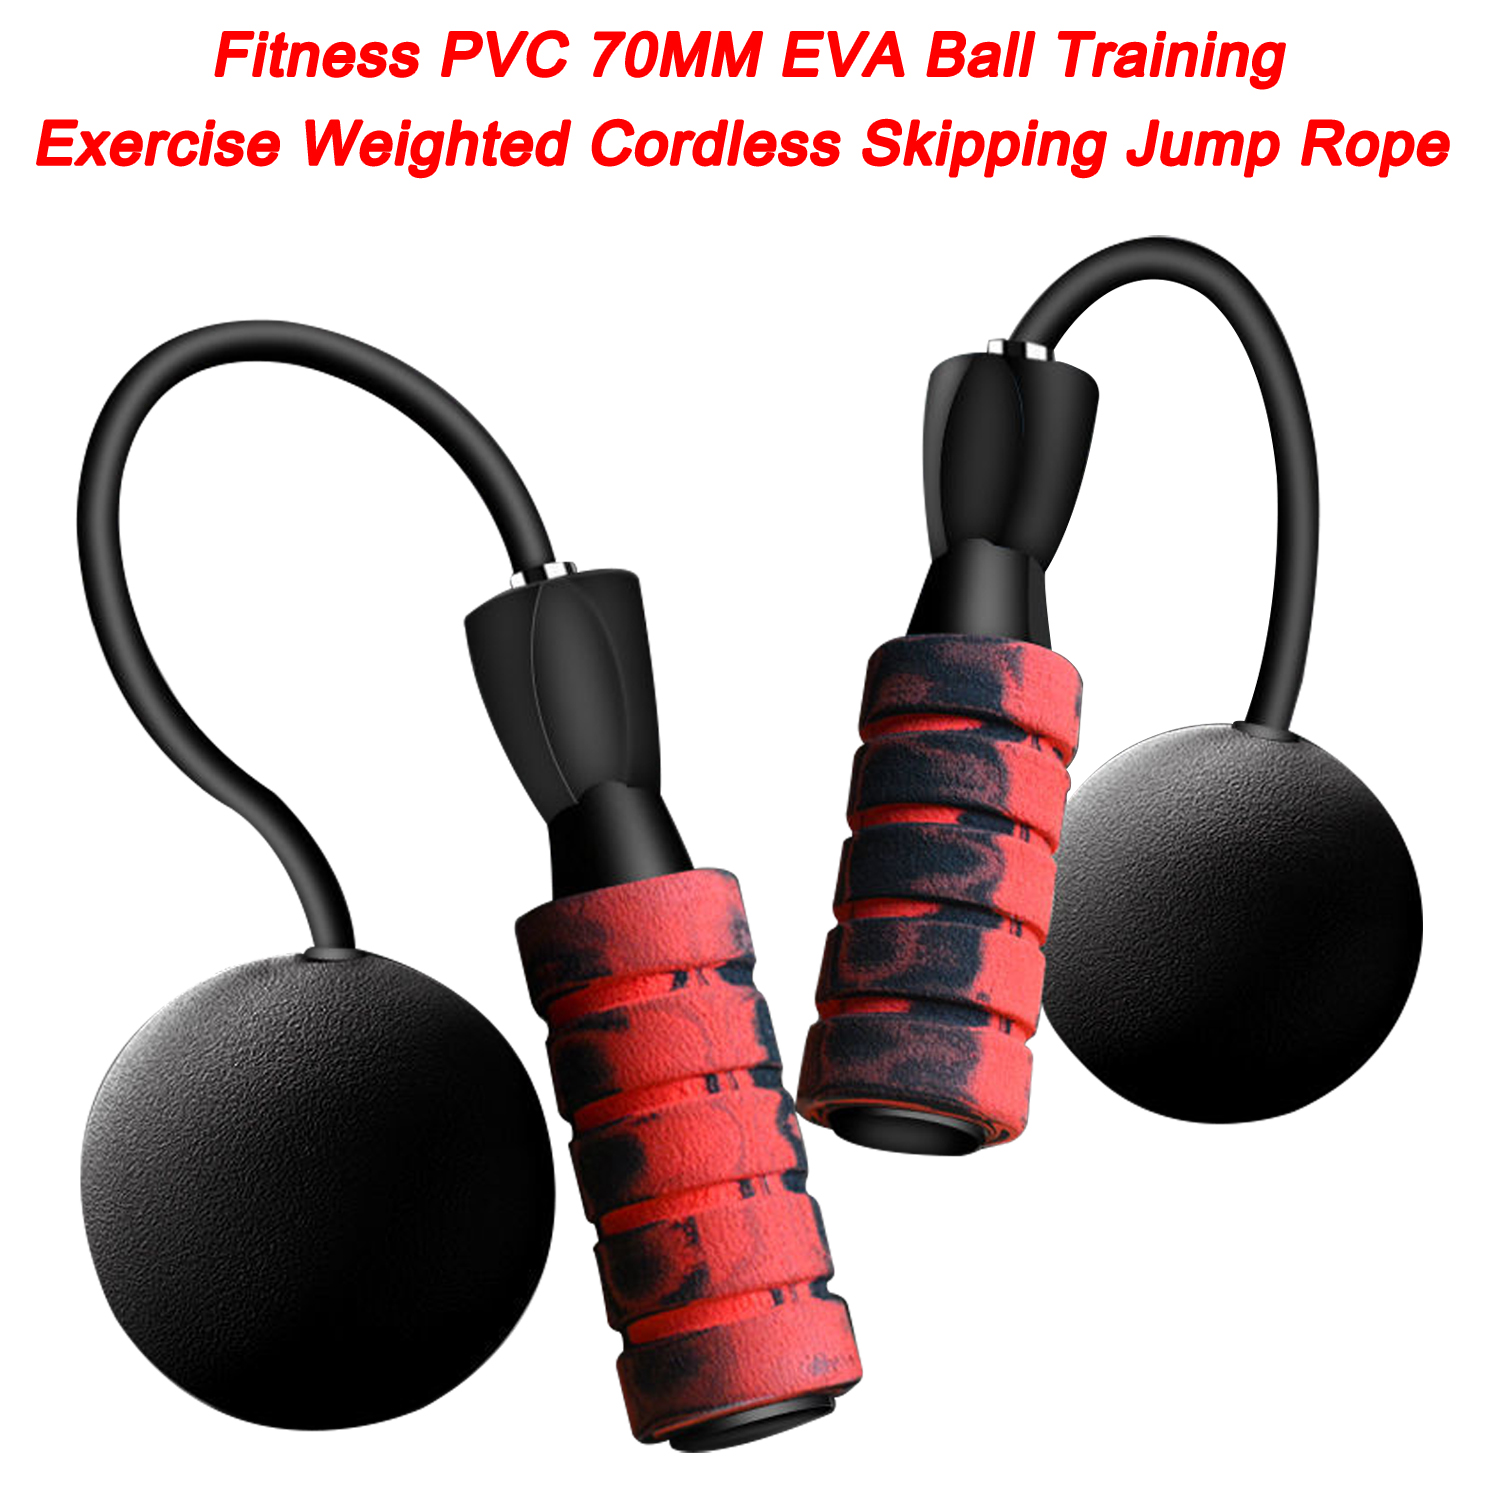 Fitness Jump Rope EVA Ball Training Exercise Weighted Cordless Skipping Jump Rope